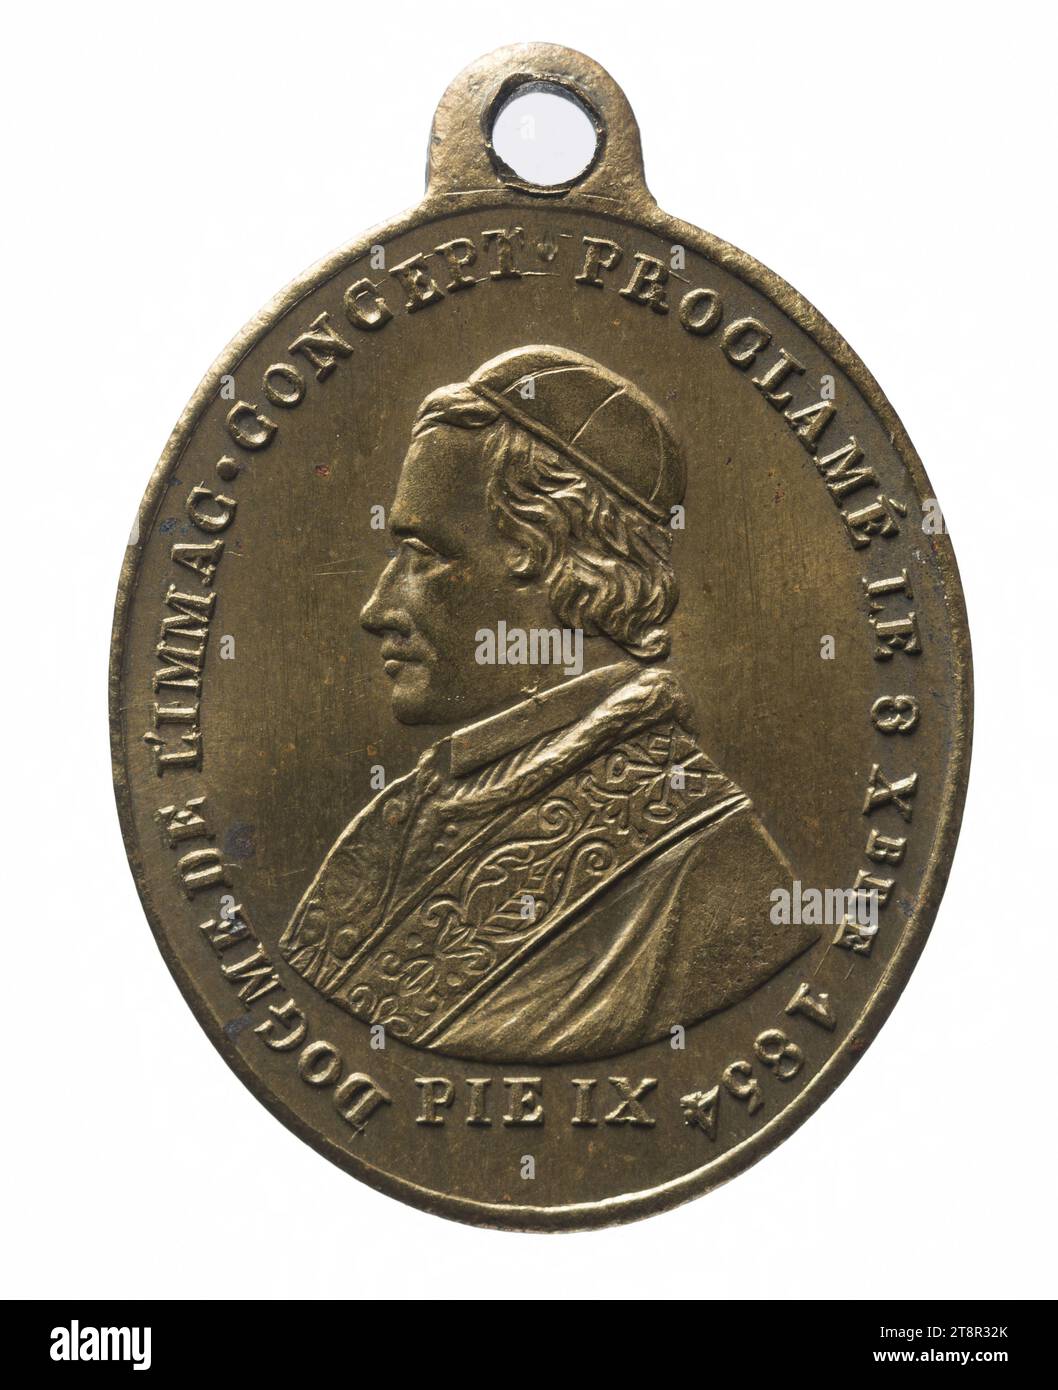 Proclamation of the dogma of the Immaculate Conception by Pius IX, December 8, 1854, In 1854, Numismatic, Medal, Copper, Silver plated = silver plating, Dimensions - Work: Height: 1.7 cm, Width: 1.4 cm, Weight (type dimension): 1.08 g Stock Photo